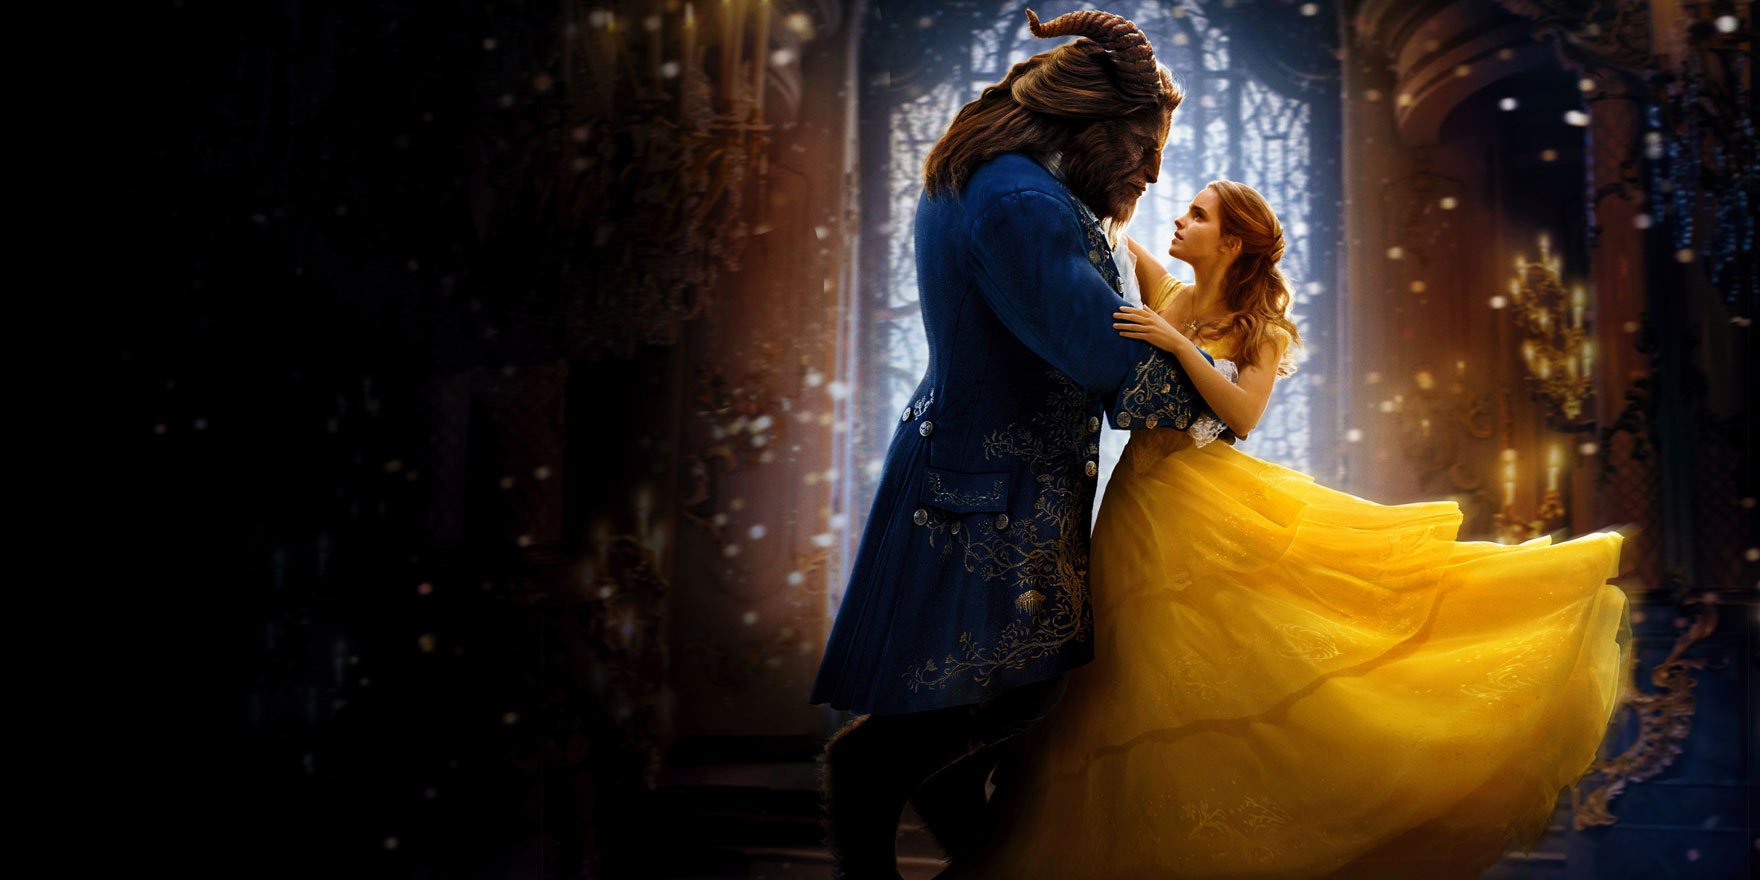 Beauty and the Beast - Header Image